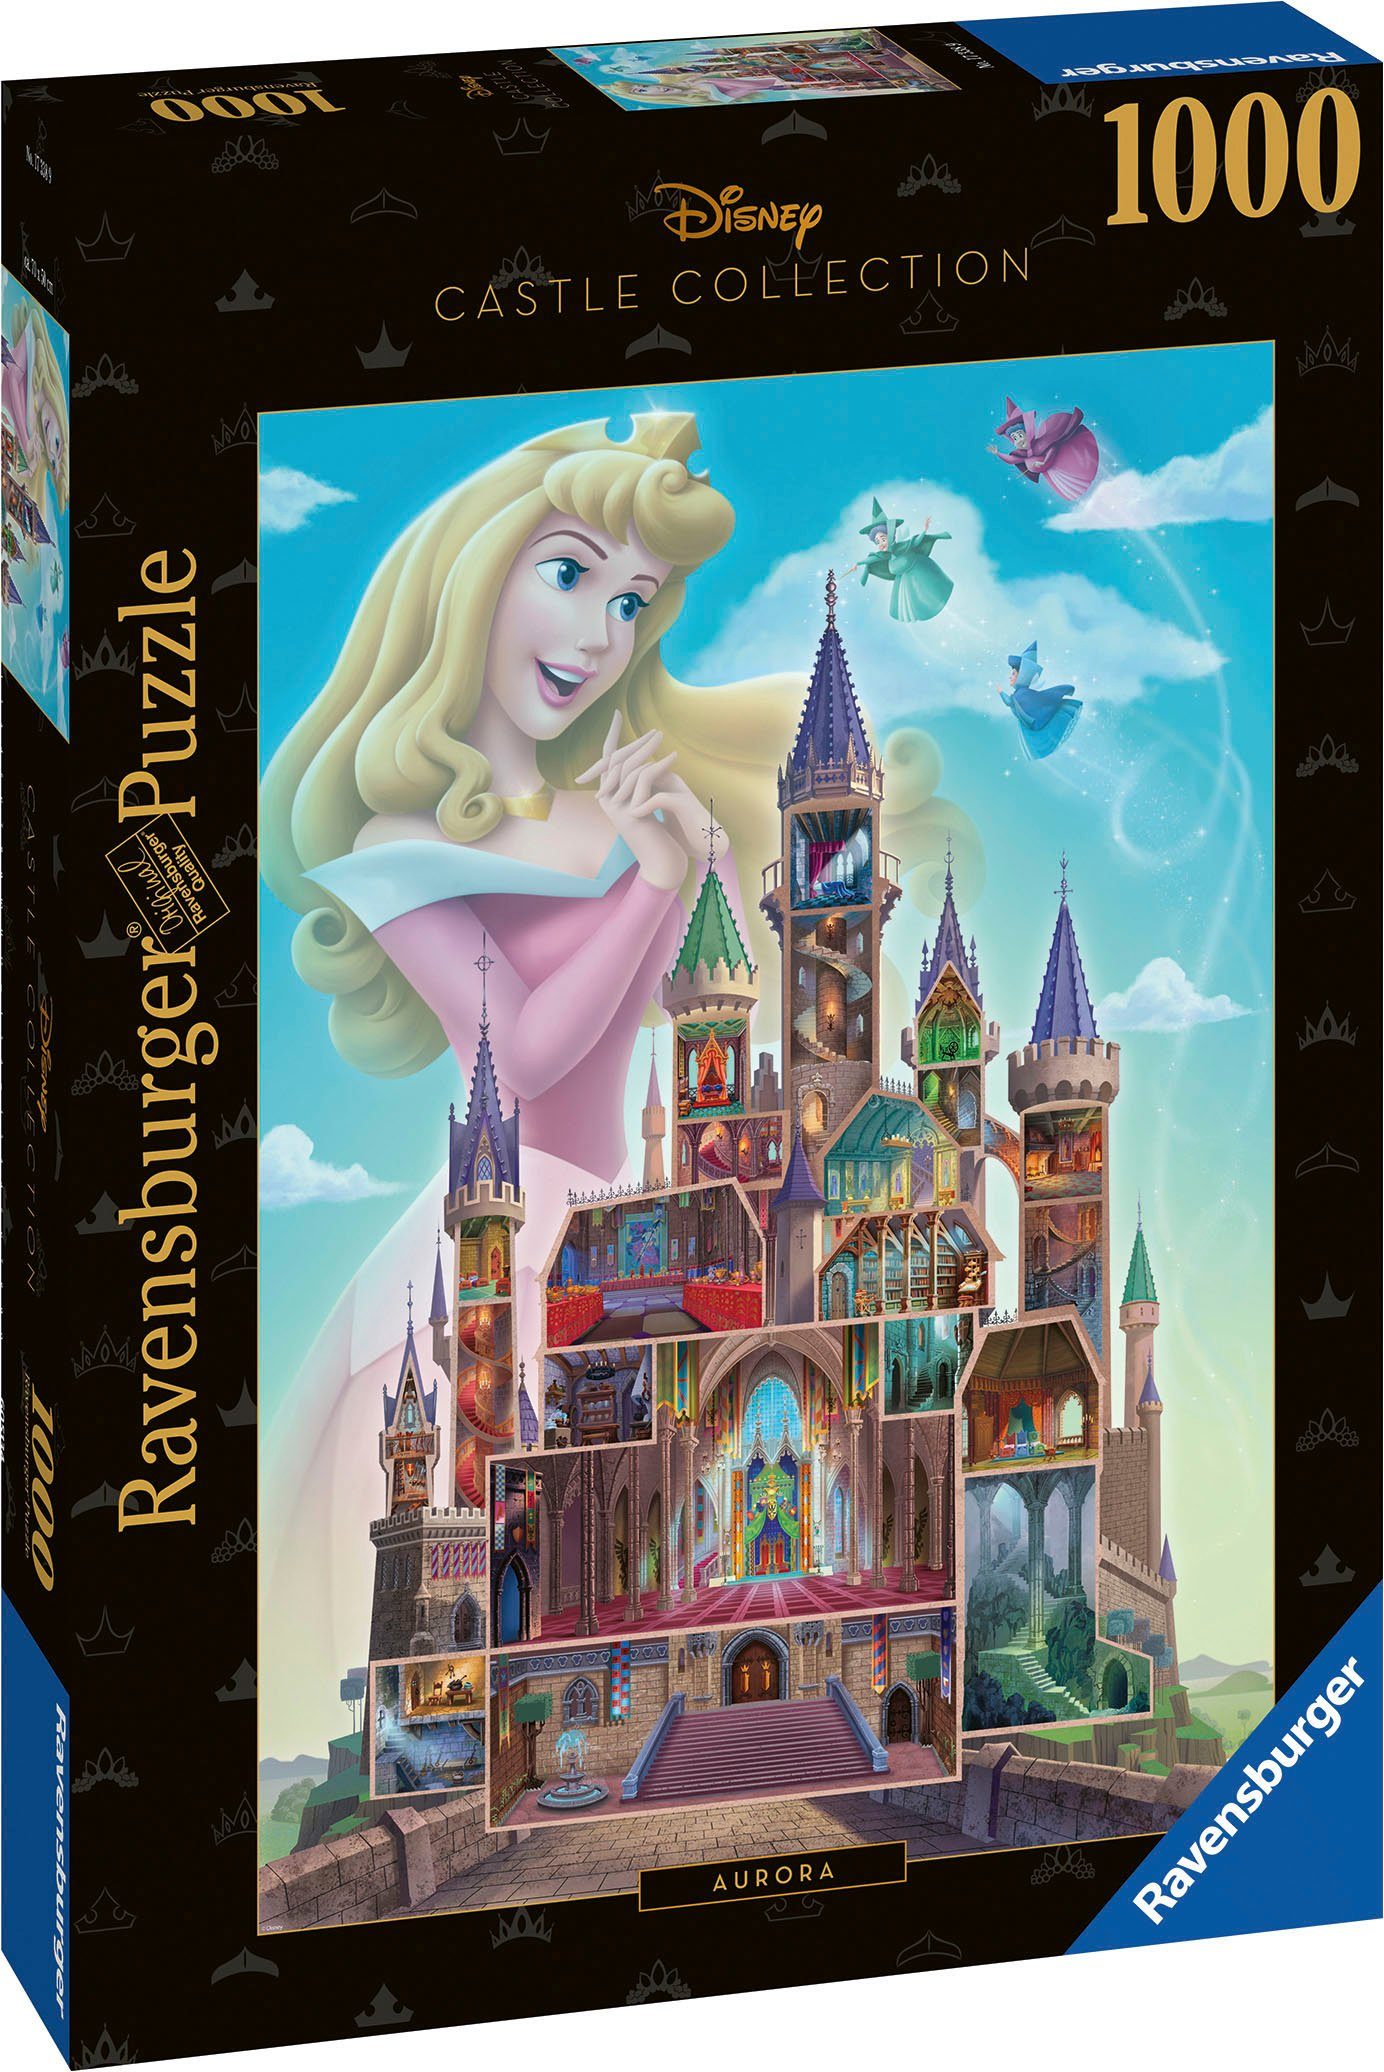 Castle Ravensburger 1000 Collection, Disney Puzzle Germany in Made Aurora, Puzzleteile,